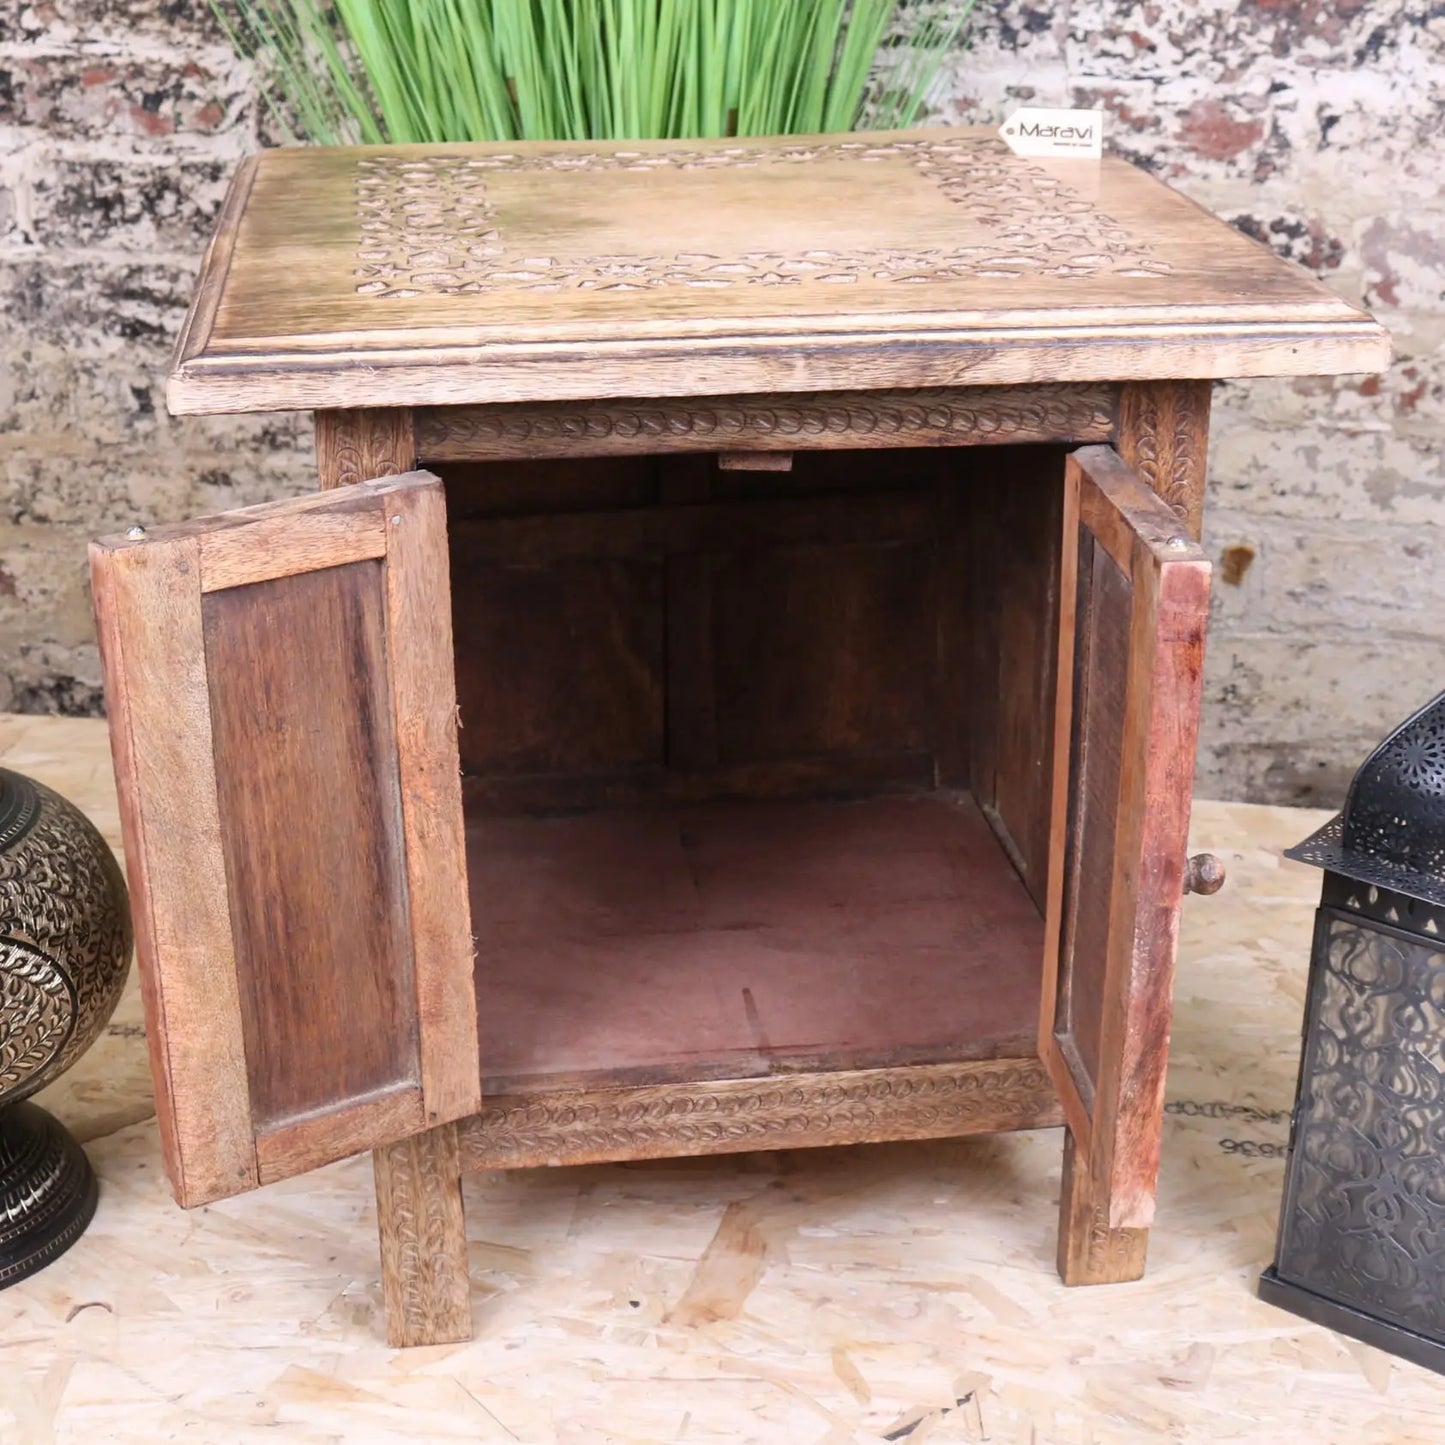 Rabat Mango Wood Hand Carved Moroccan Side Table - Doors Fully Opened